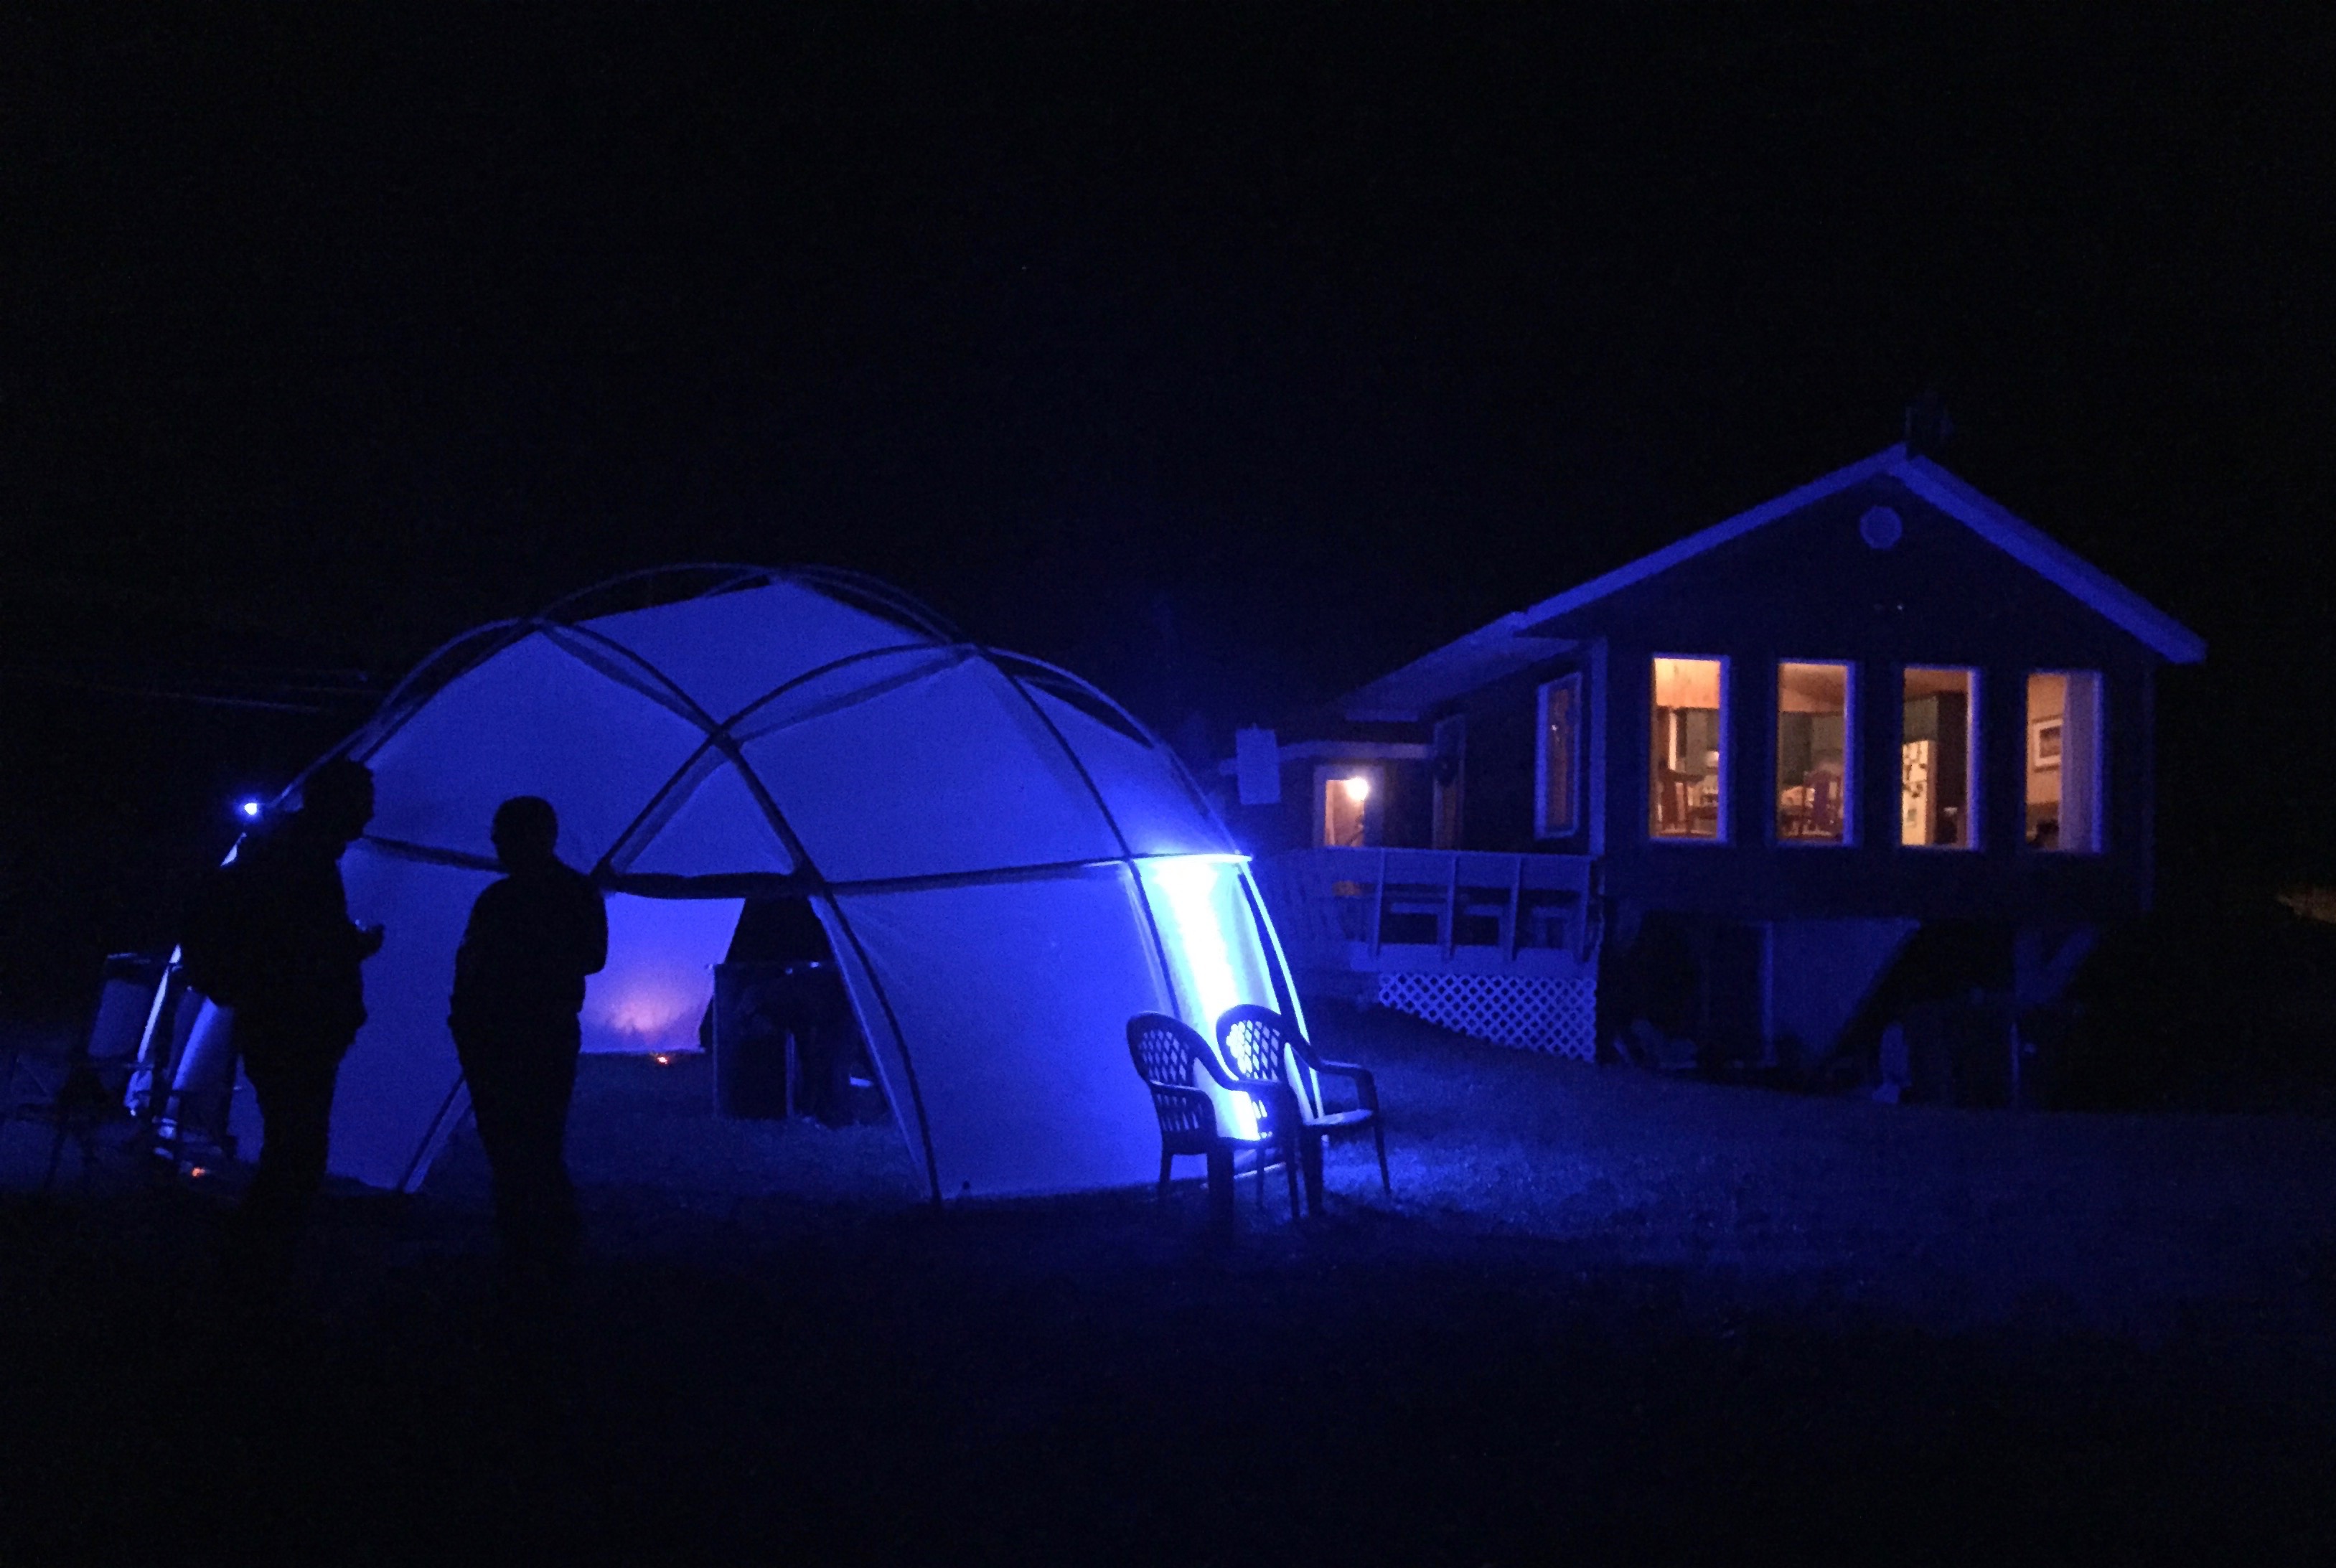 MILE Camp geodesic dome dome